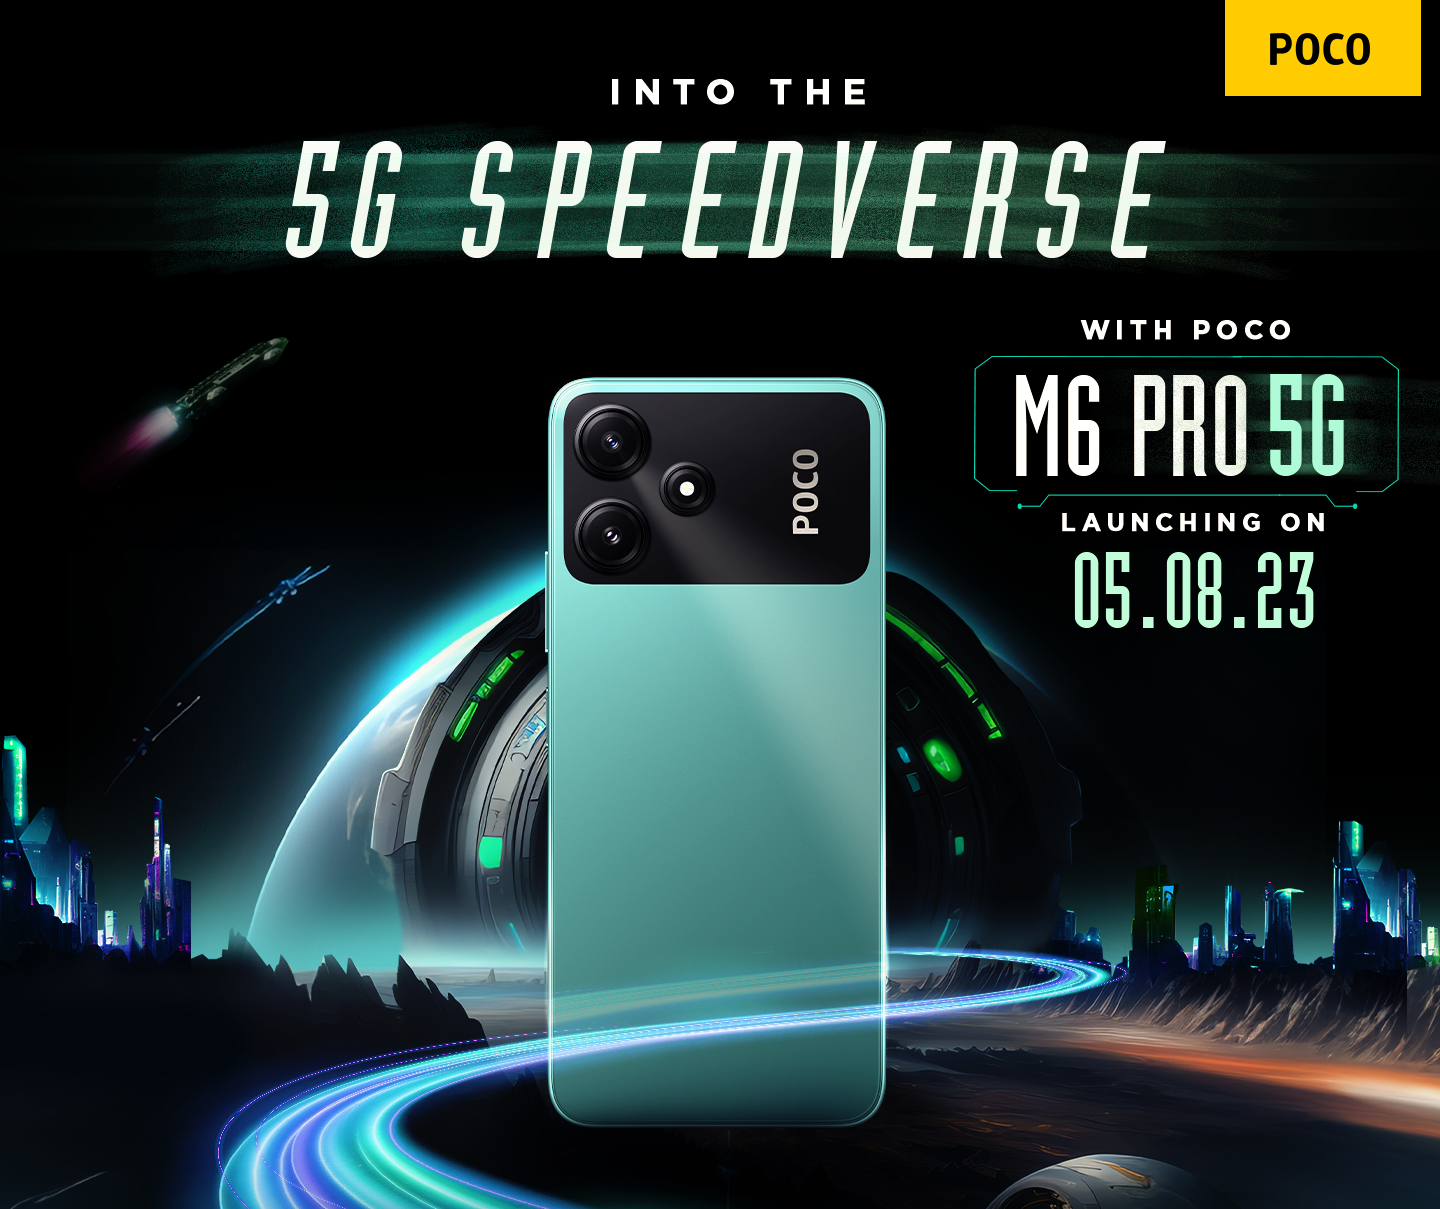 POCO M6 Pro 5G launched in India: price, specifications, release date